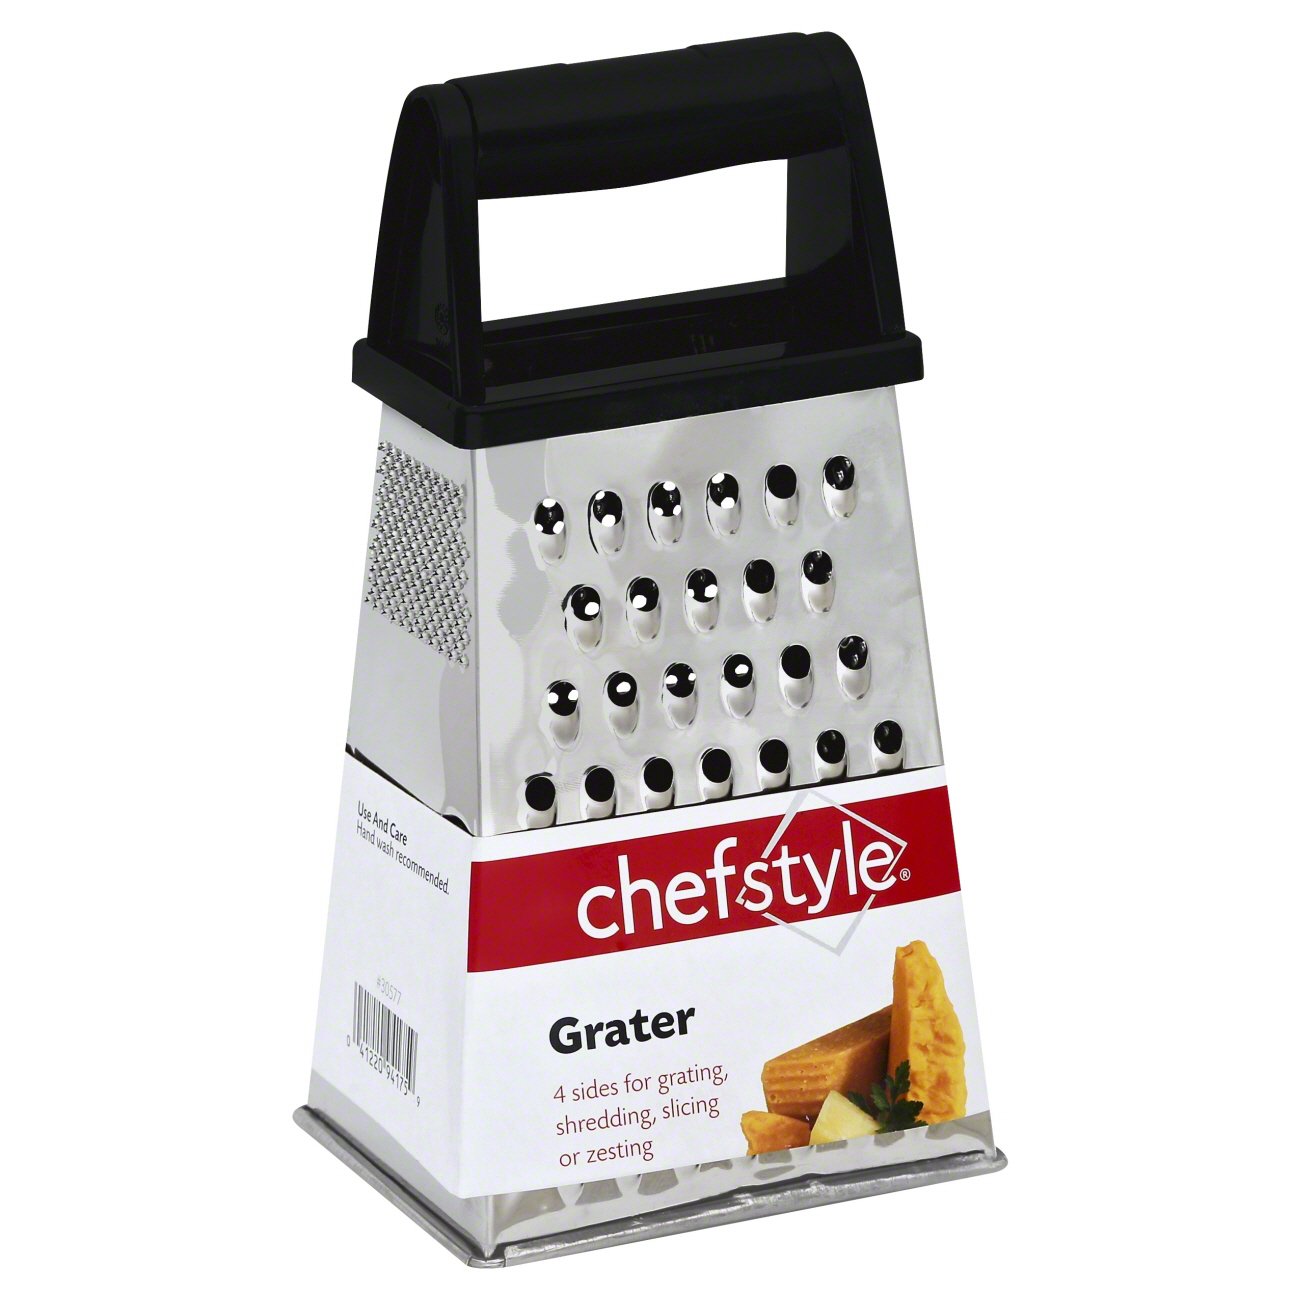 chefstyle Stainless Steel Hand Grater